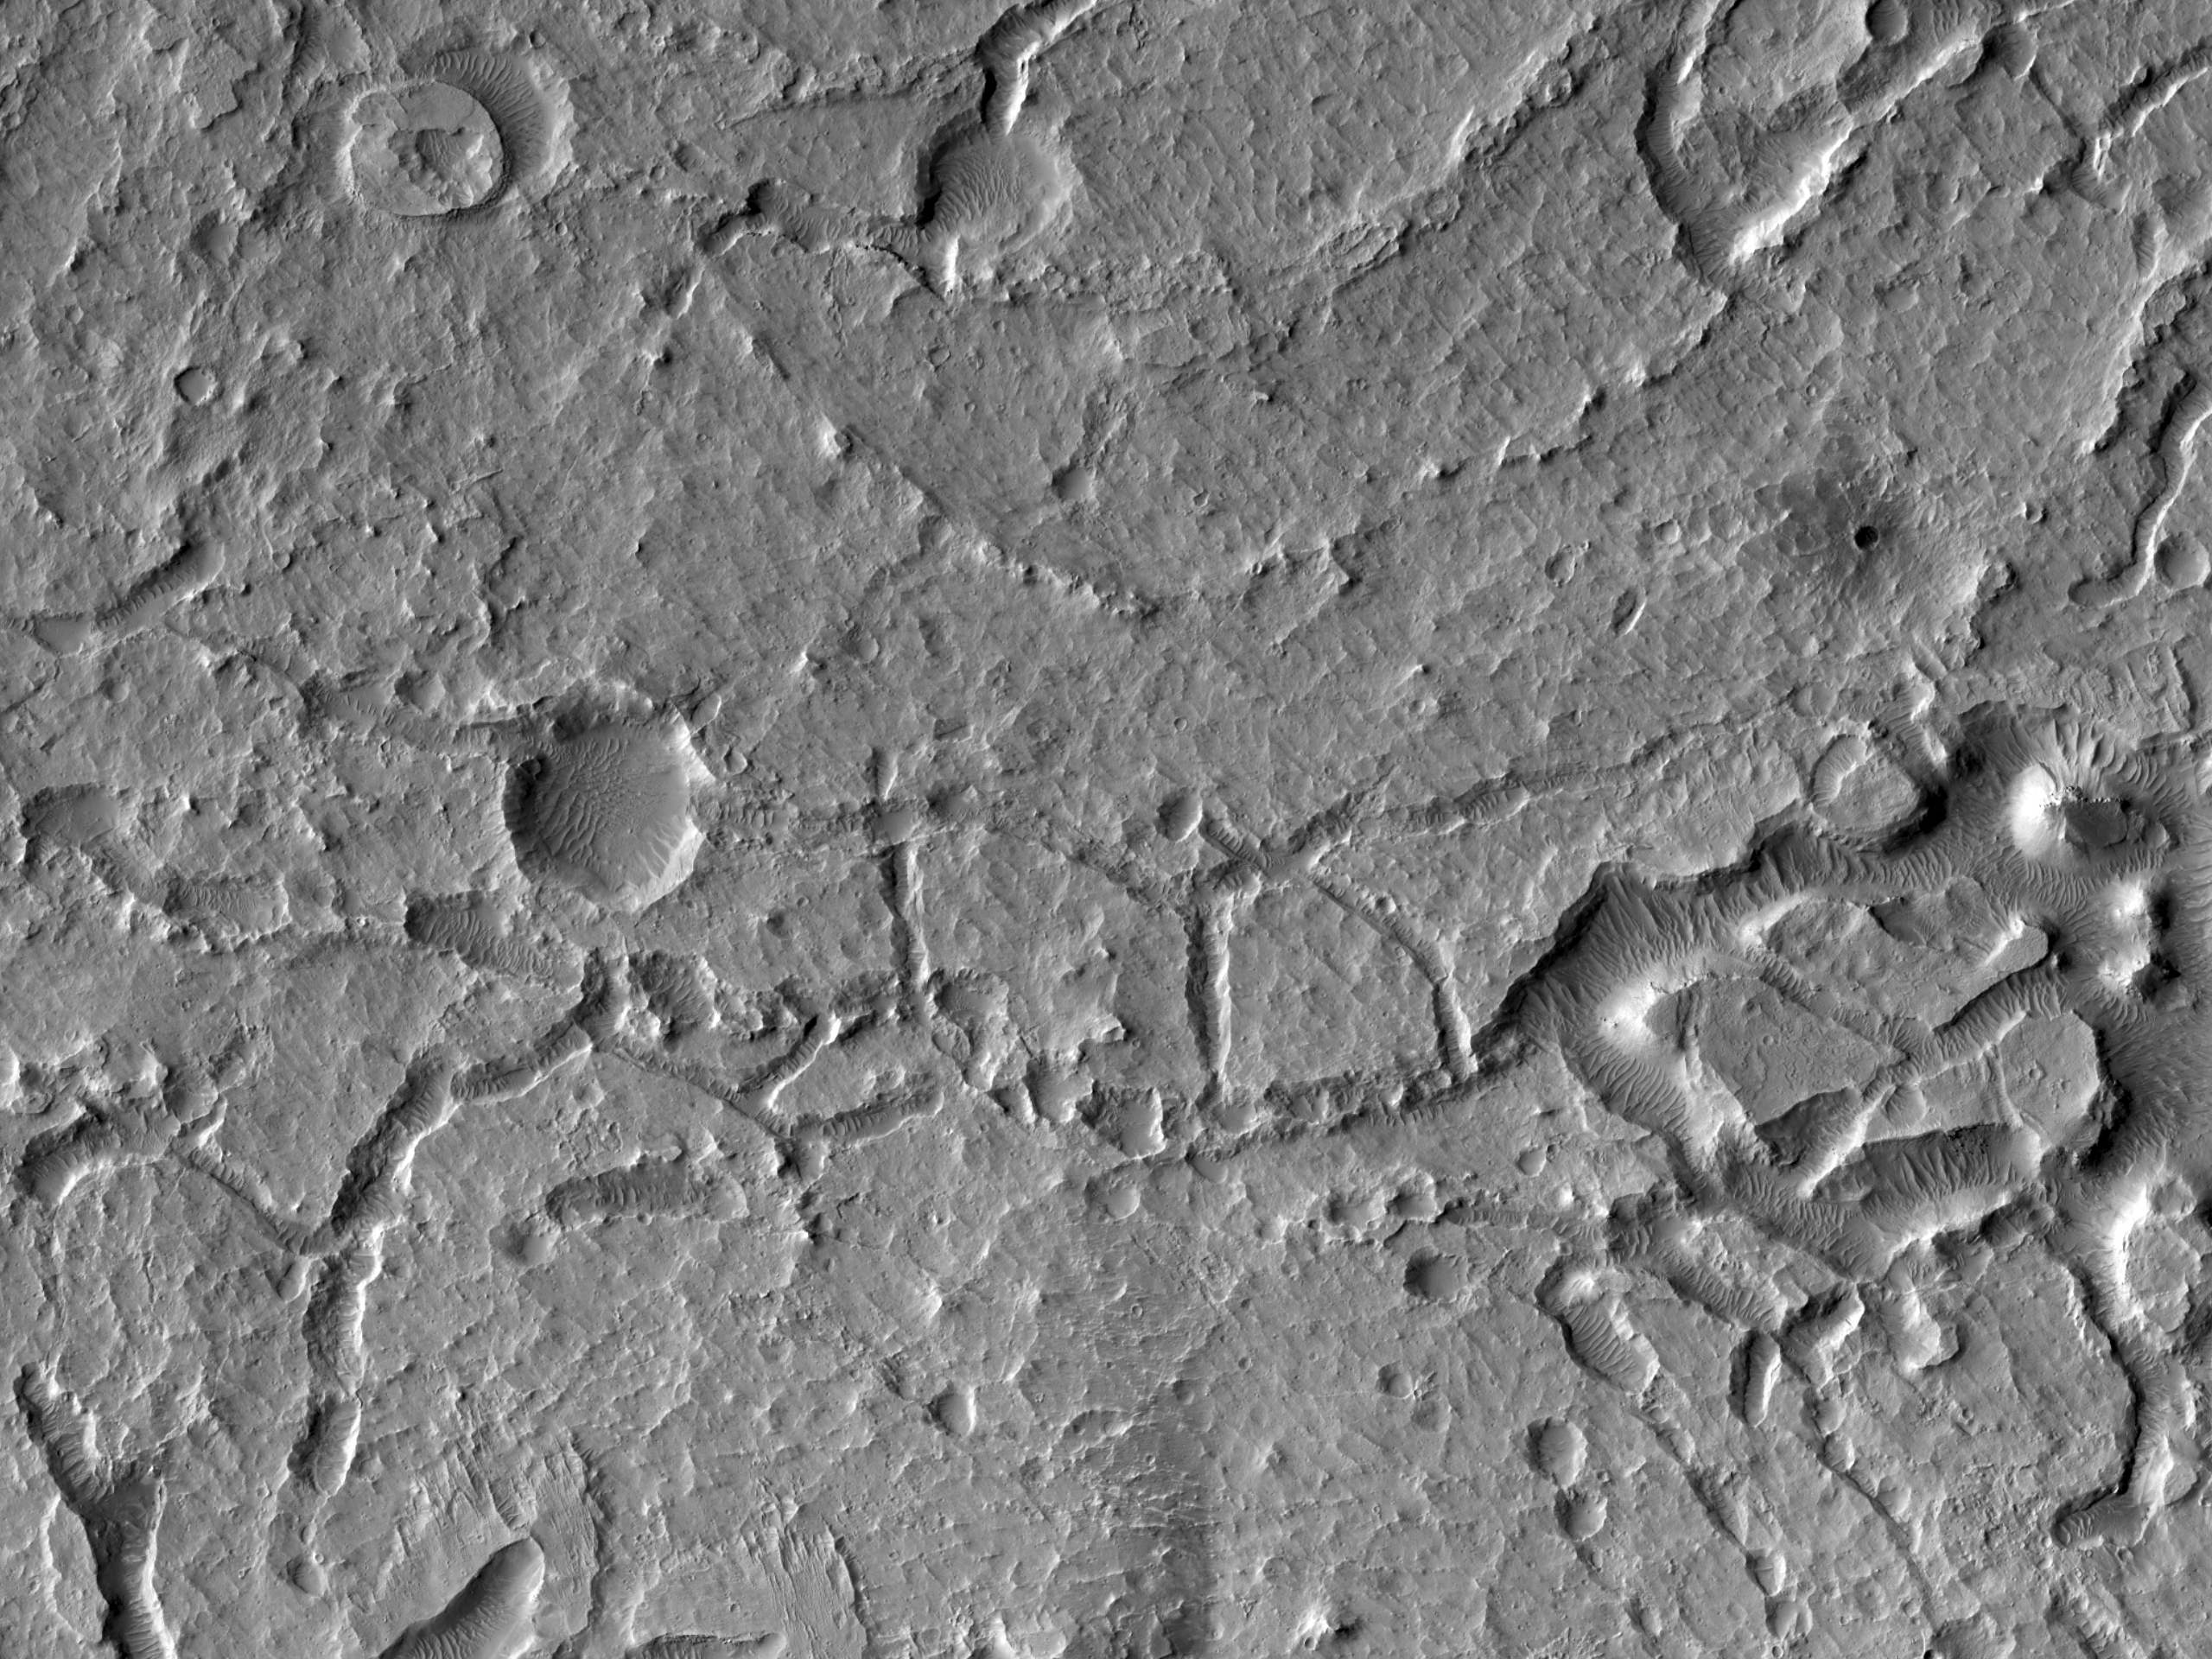 A Collection of Landforms in Eastern Elysium Planitia